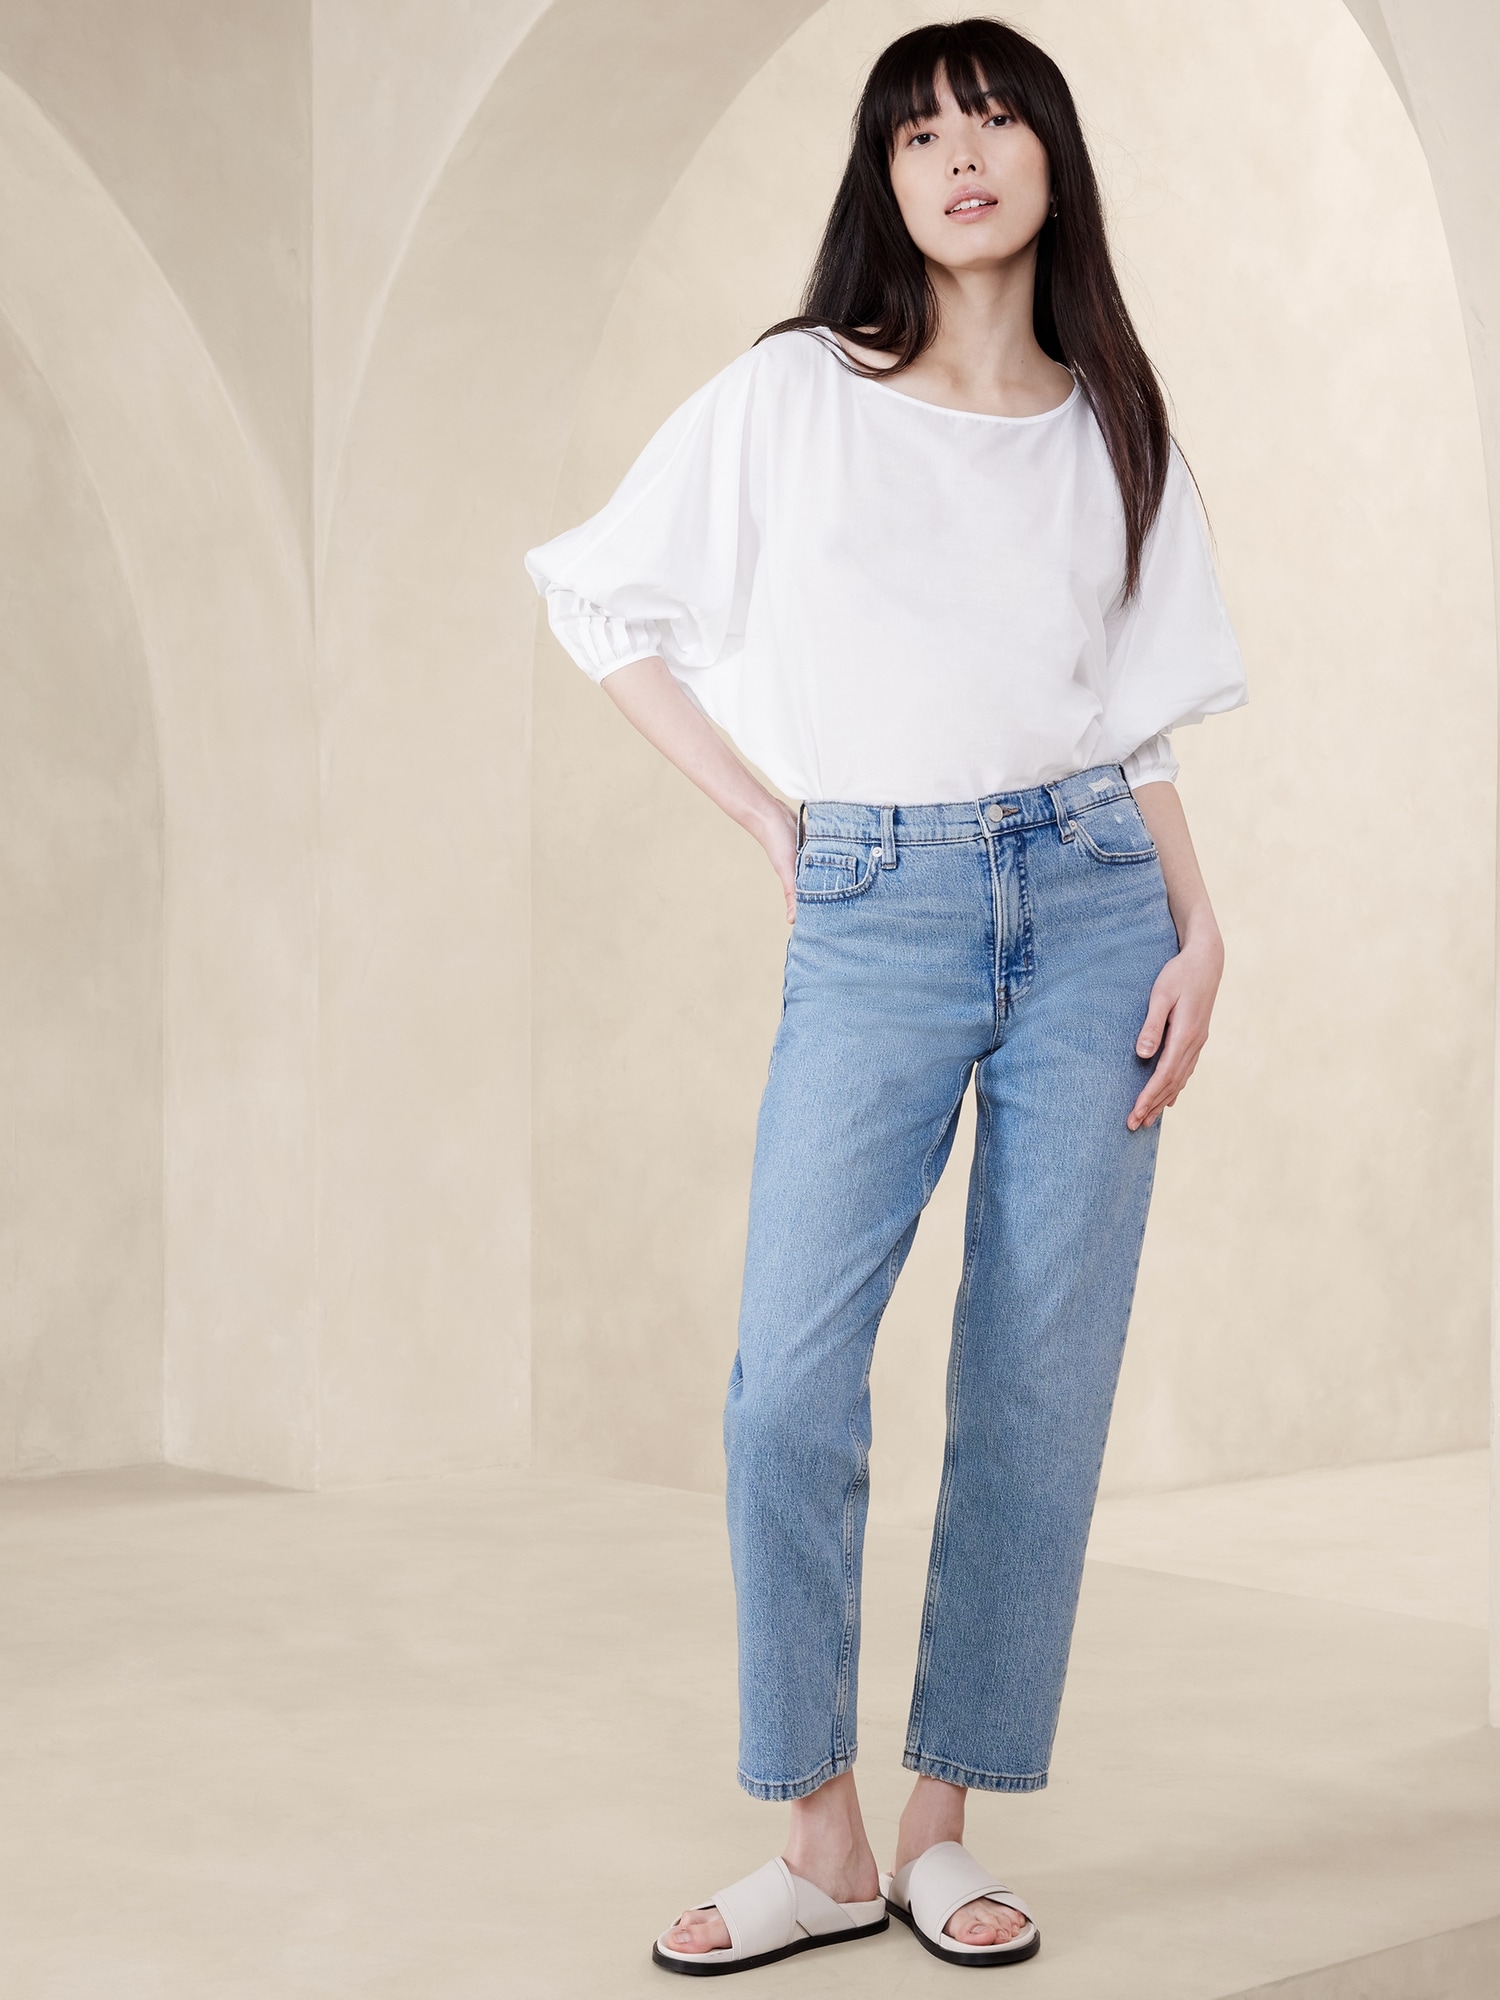 Cropped Pleated-Sleeve Blouse